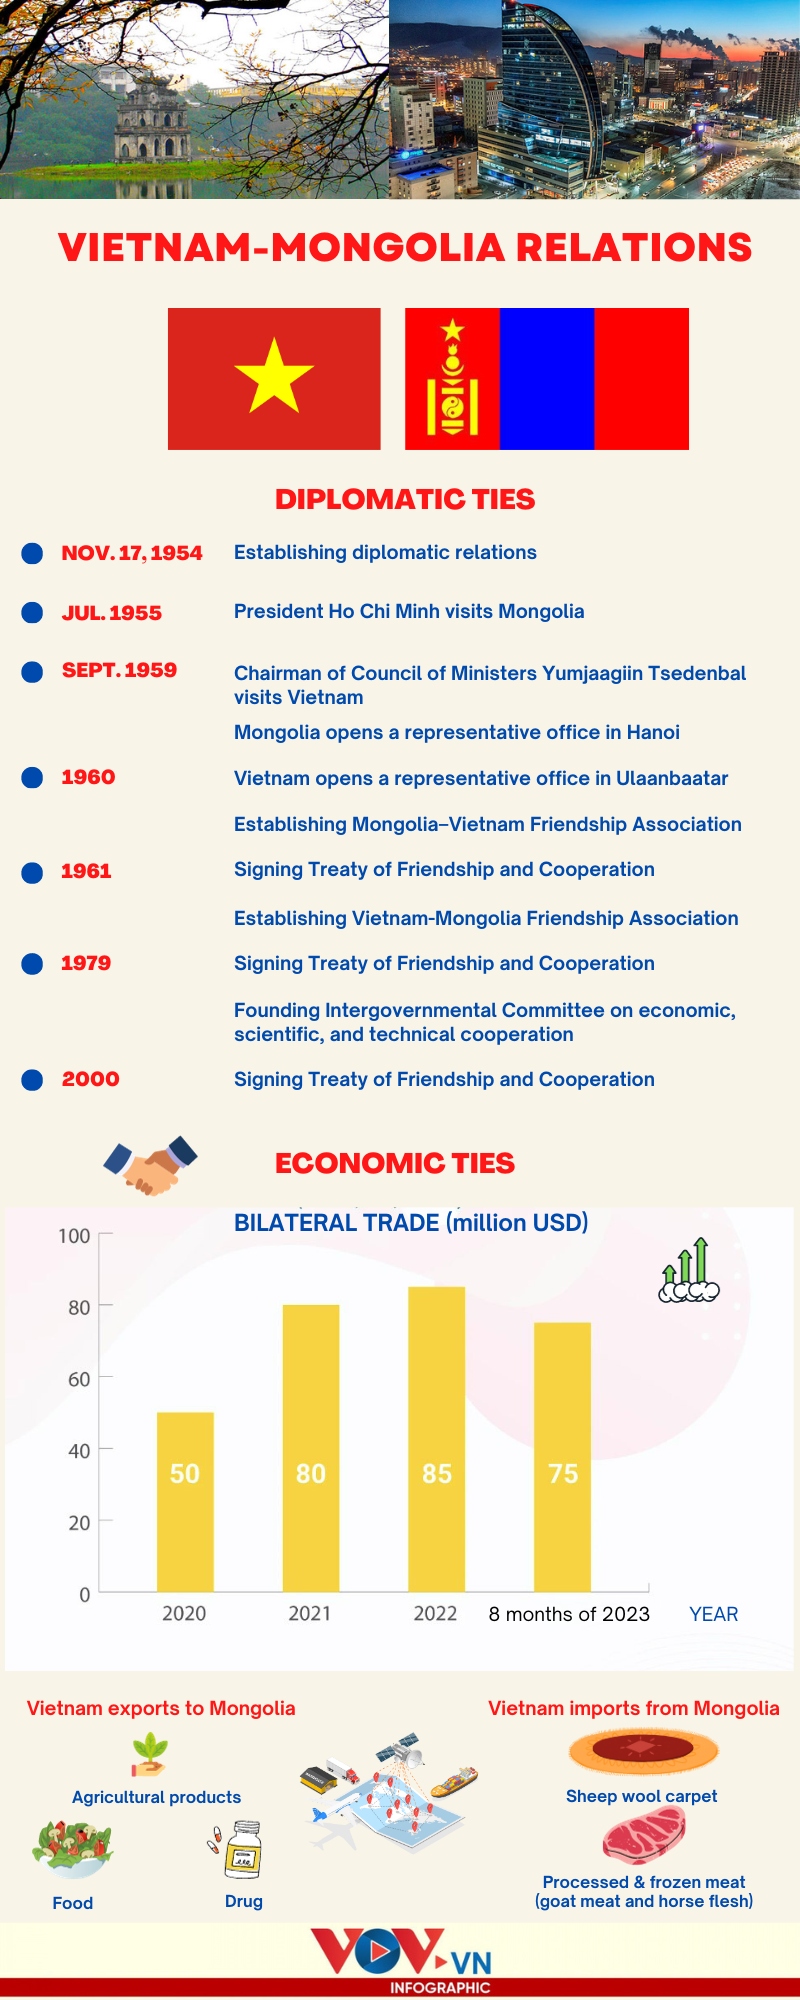 major milestones in vietnam-mongolia traditional friendly relations picture 1